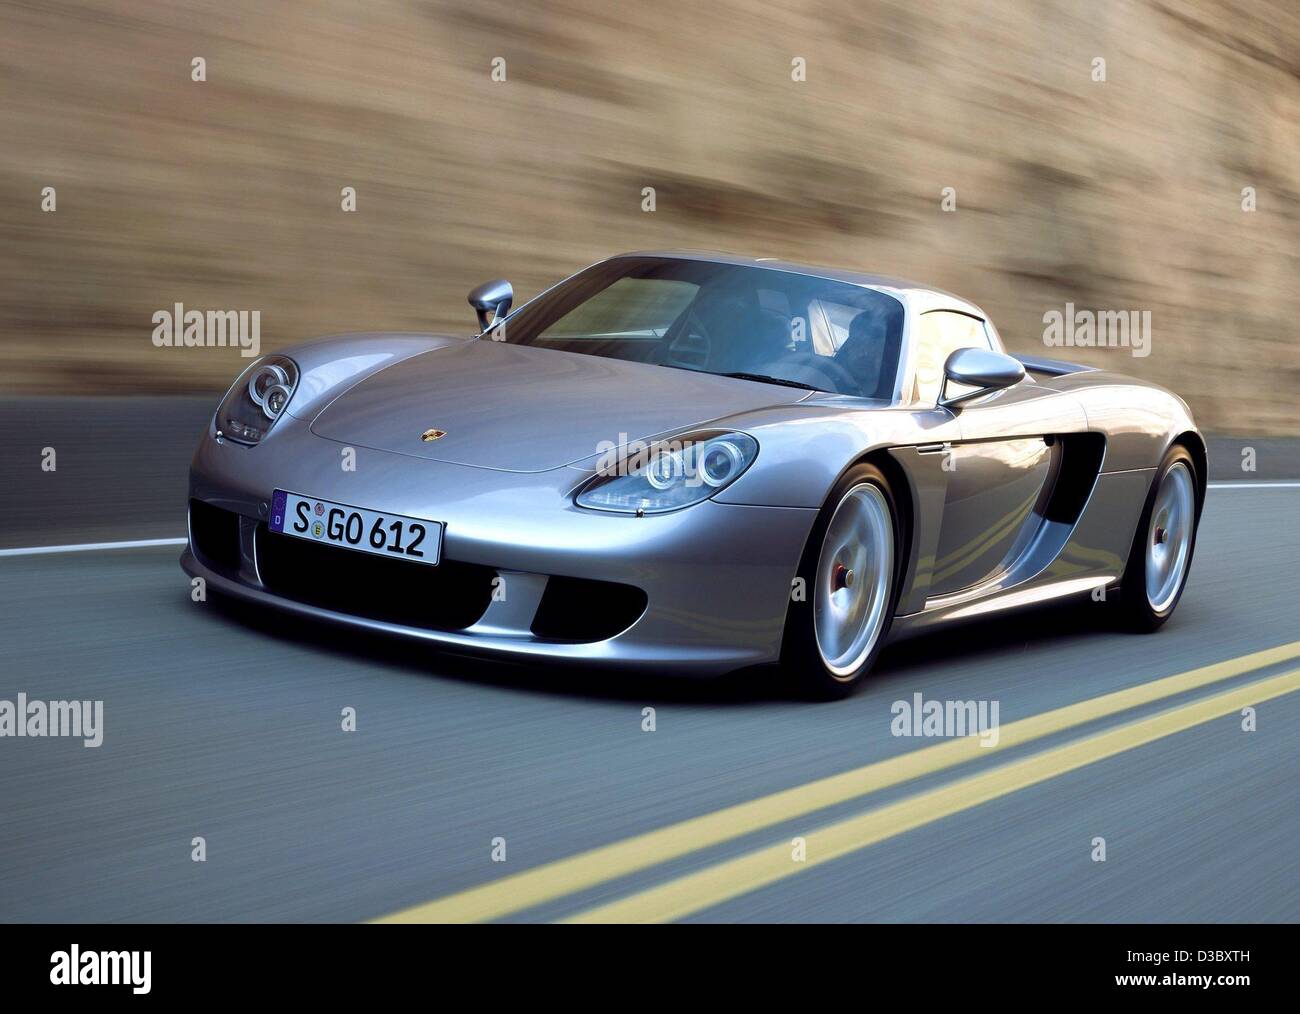 (dpa) - A handout shows the new Porsche Carrera GT (handed out by Porsche on 5 August 2003). Production of the Carrera starts in August in Leipzig, the first models are expected to be delivered this autumn. The Carrera will be the race car for the road: it has 612 hp, reaching a maximum speed of 330 Stock Photo